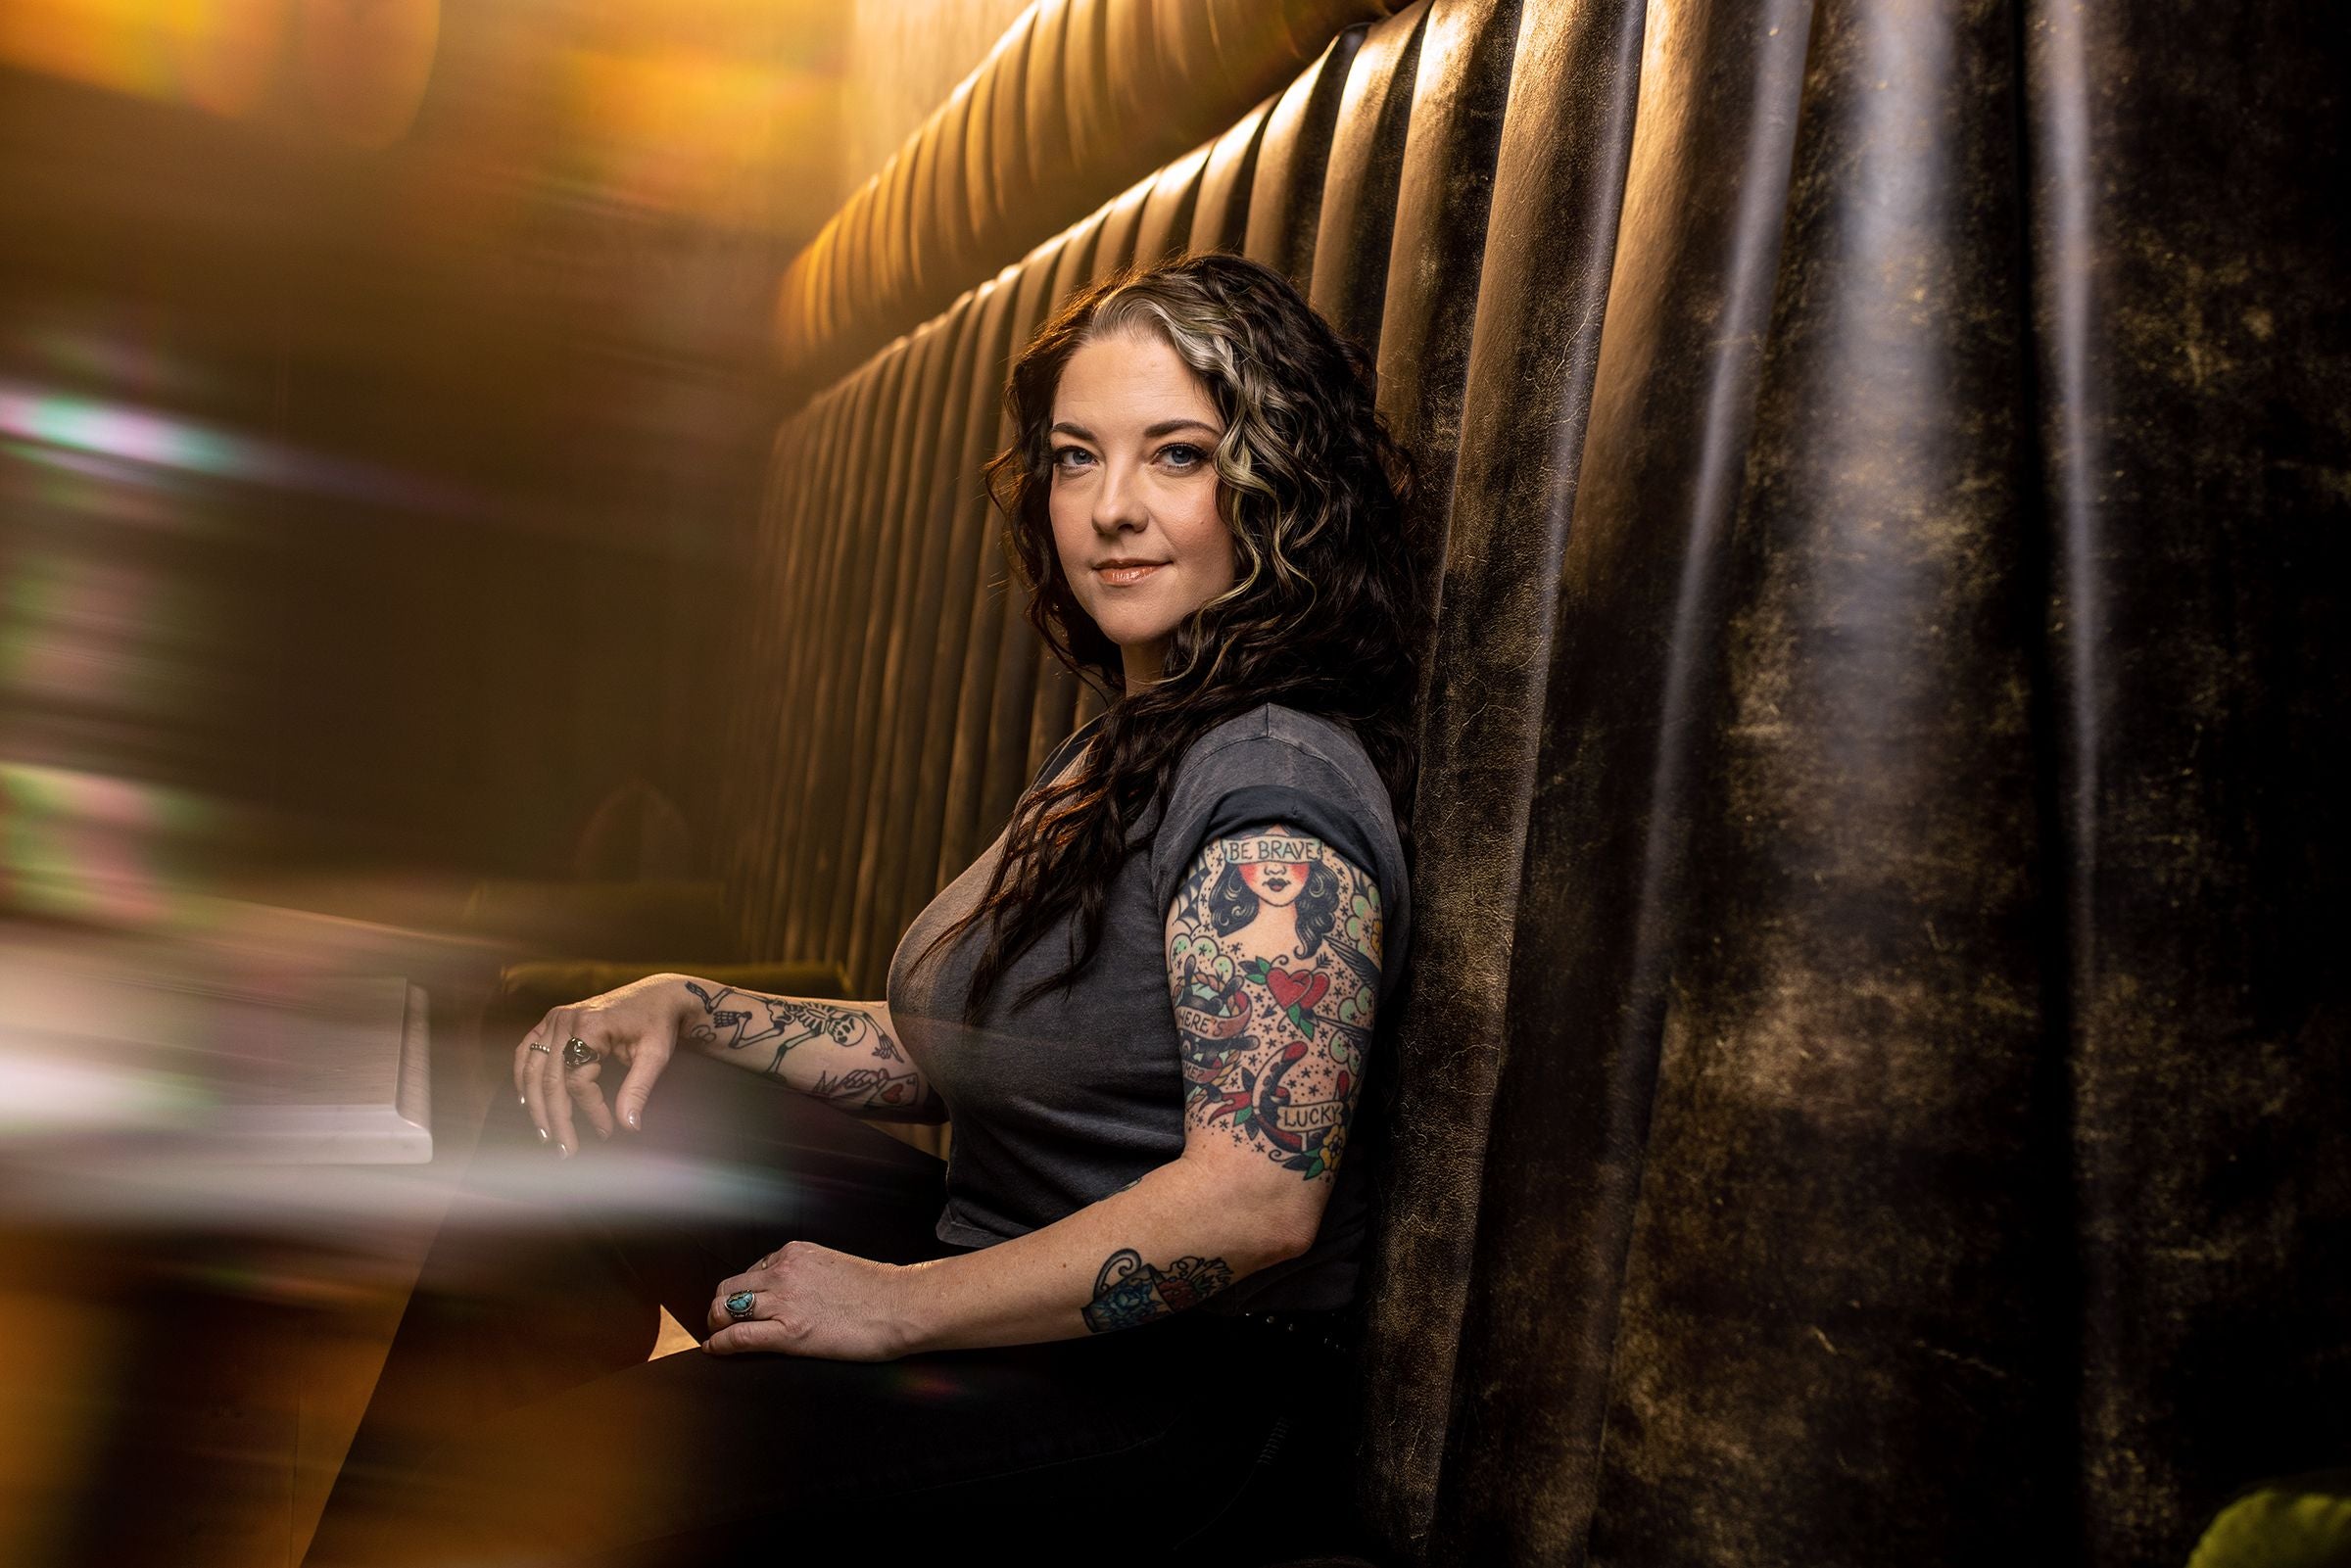 Ashley McBryde: The Devil I Know Tour free presale code for performance tickets in Las Vegas, NV (Brooklyn Bowl Las Vegas)